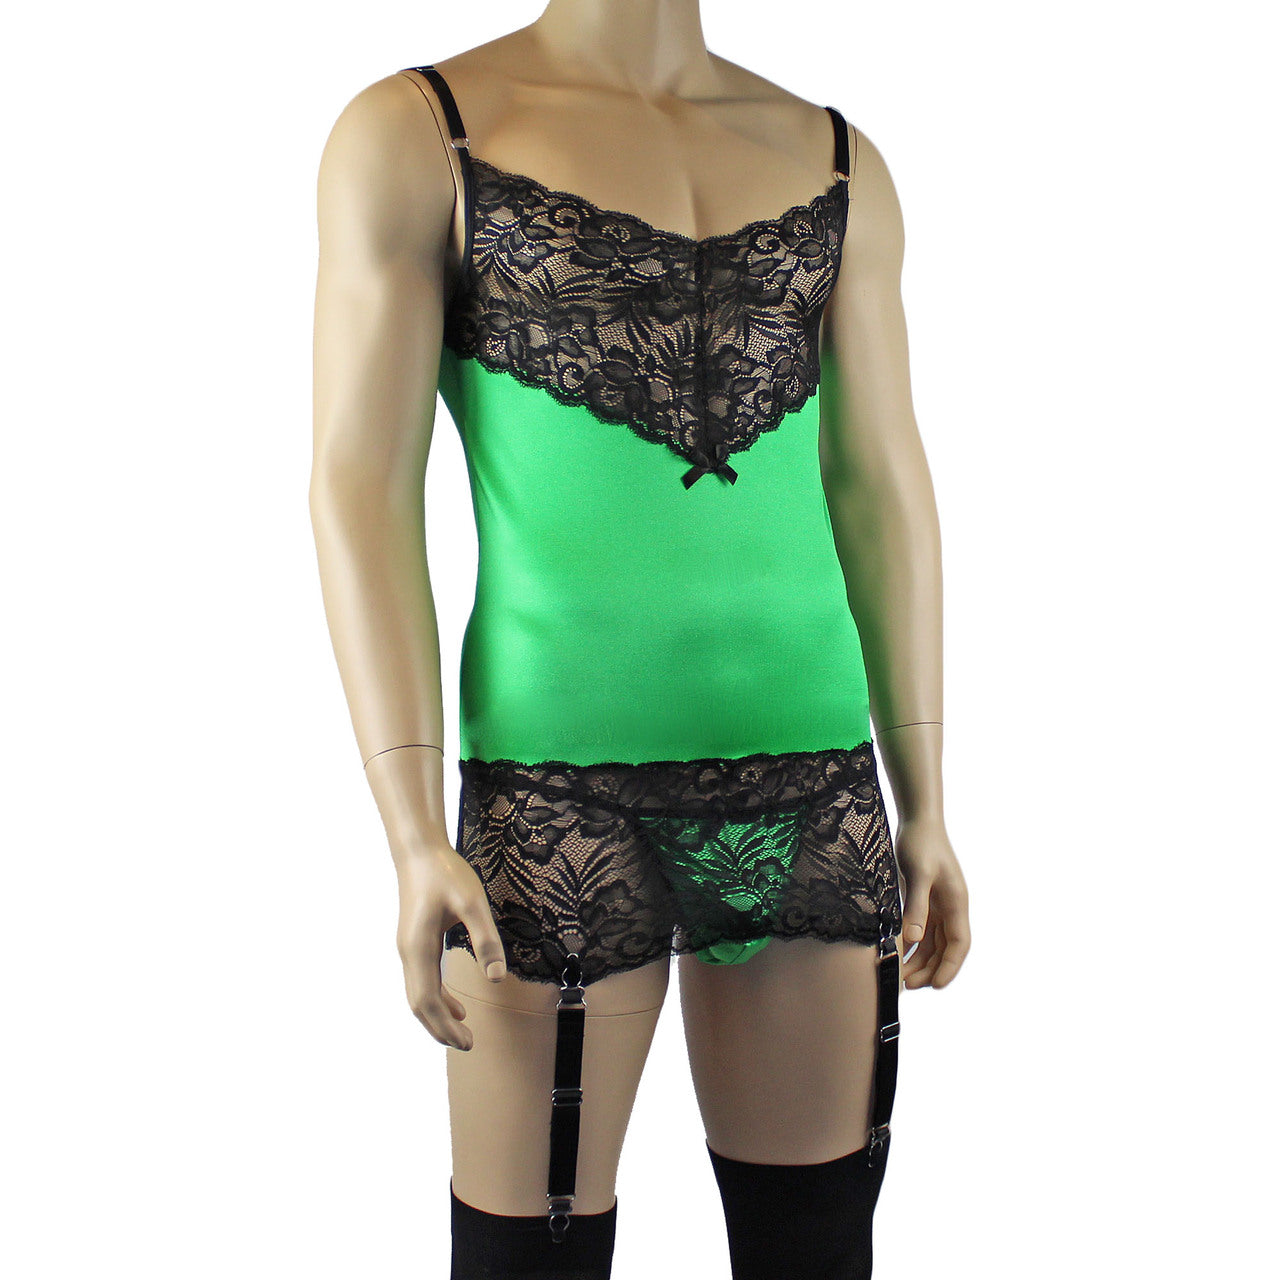 Mens Risque Camisole Mini Dress Chemise, G string & Stockings Green & Black